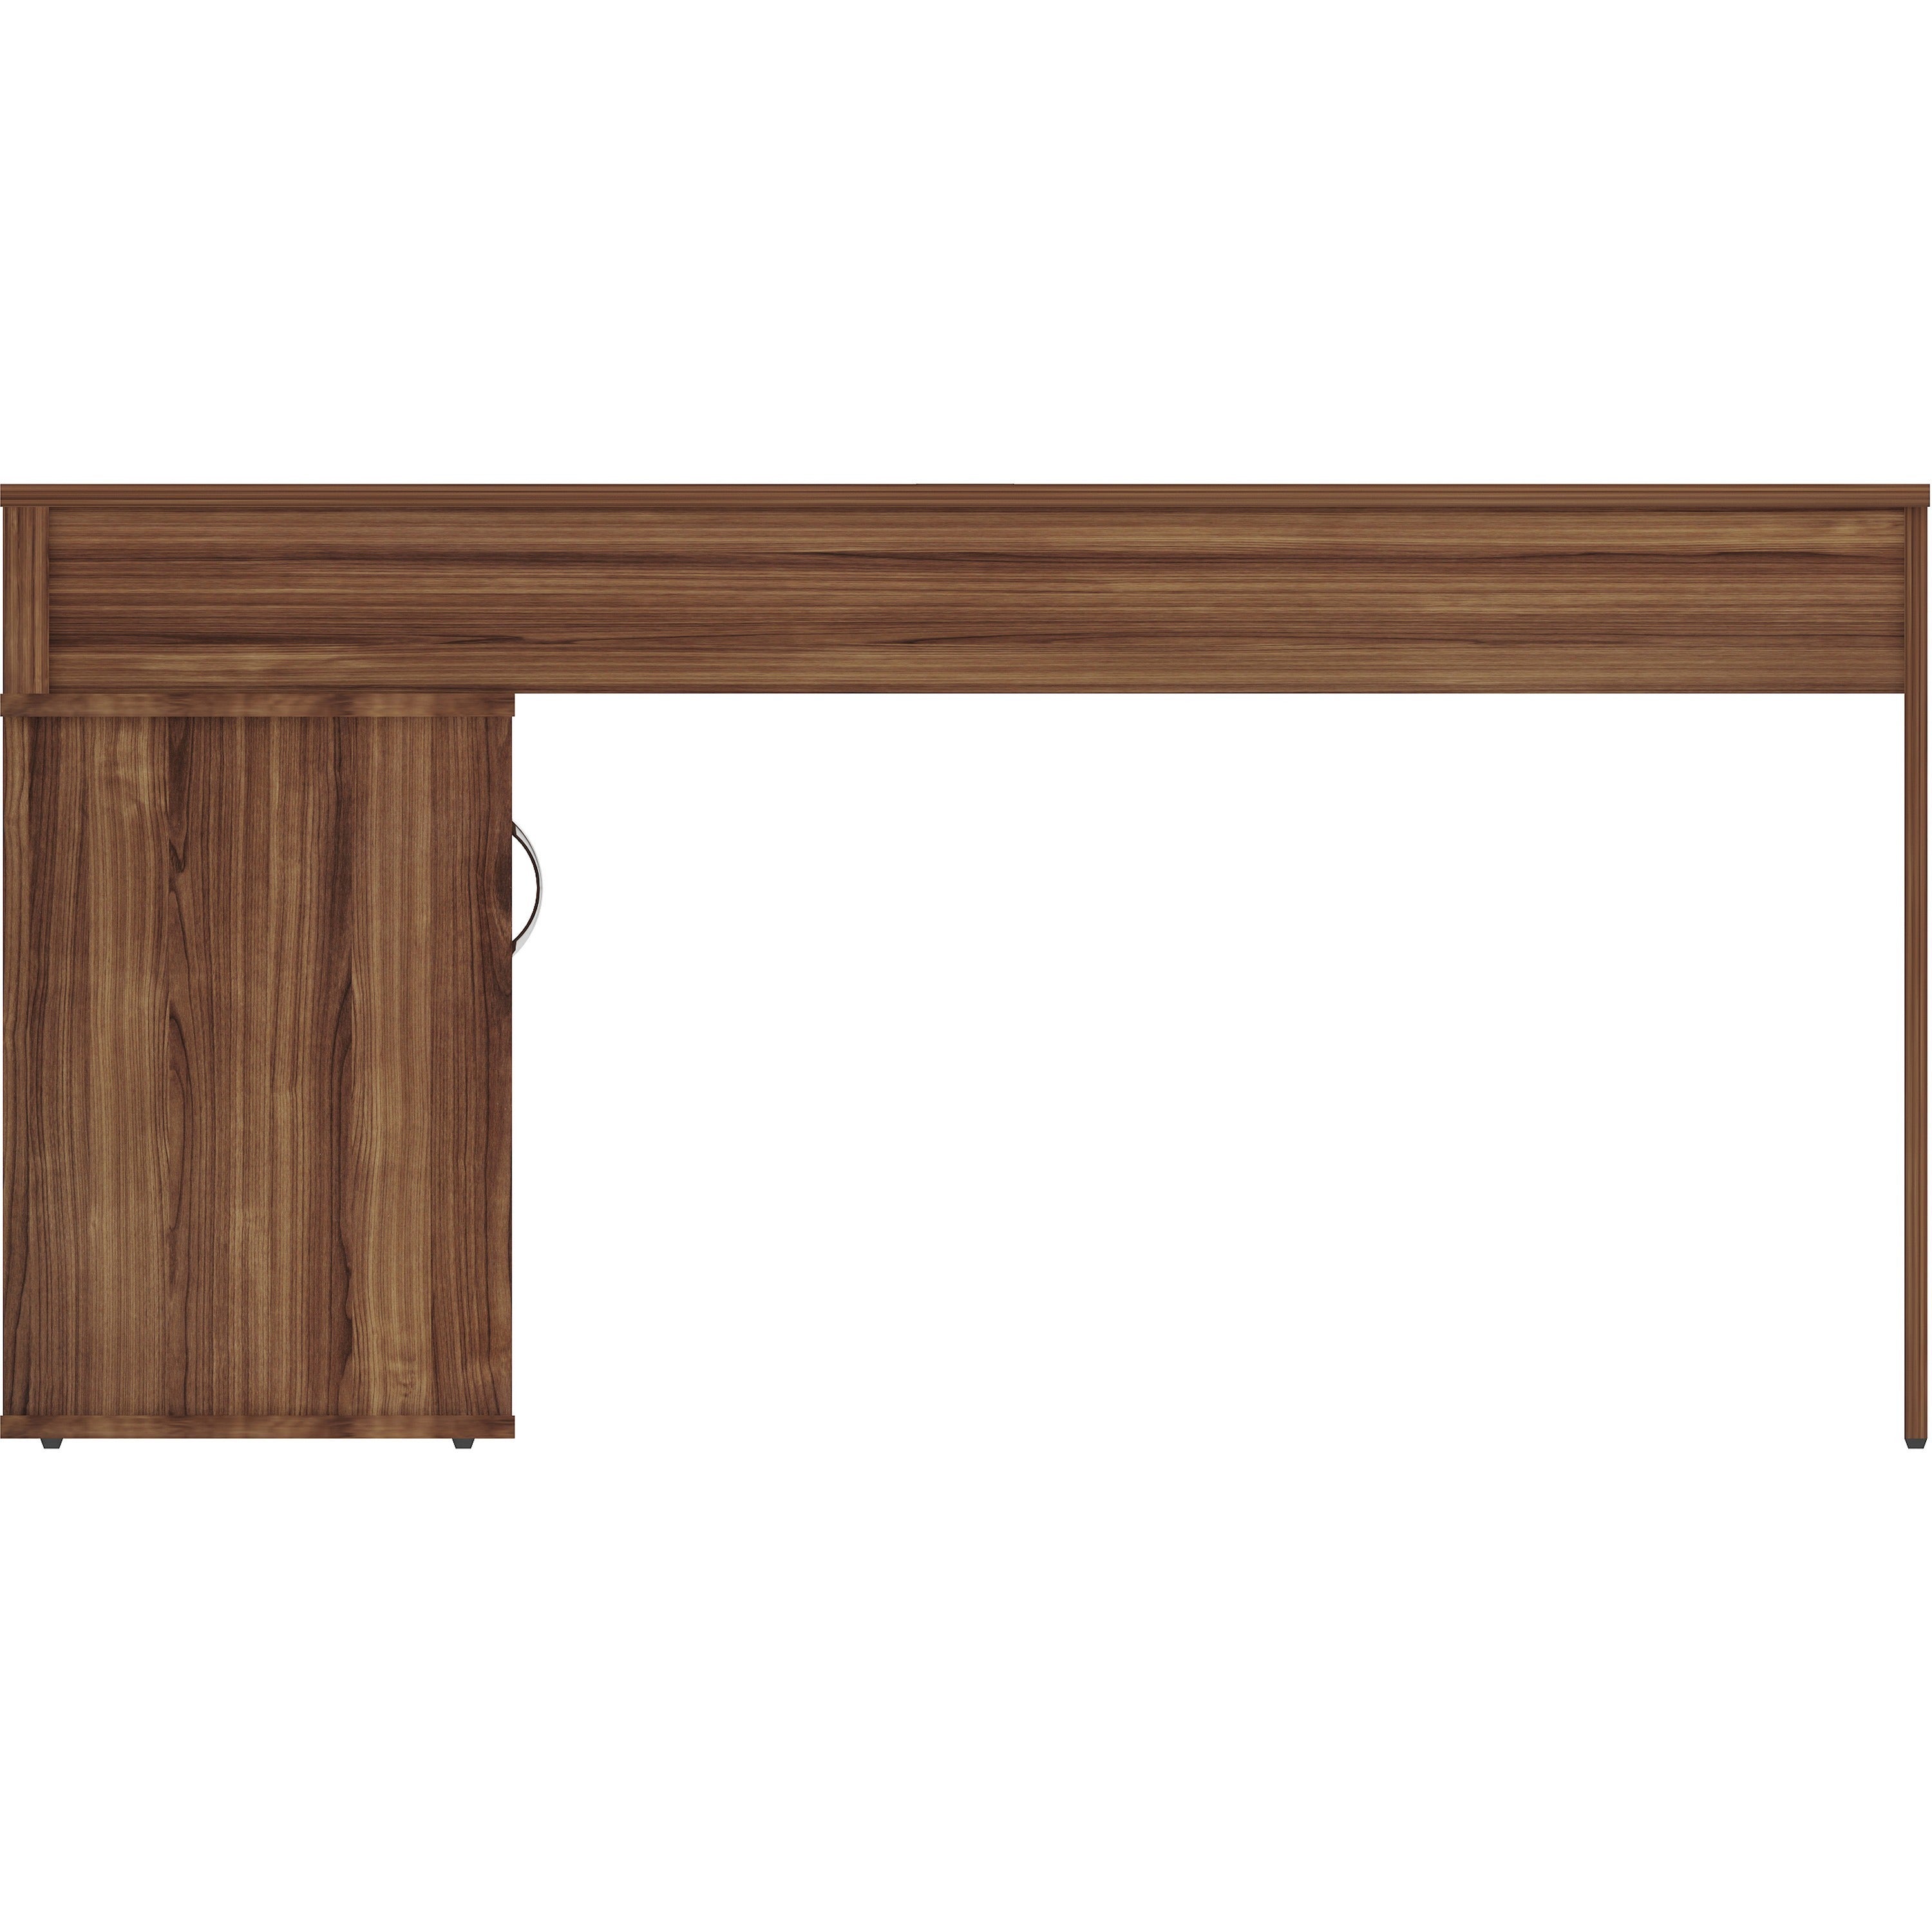 lys-l-shape-workstation-with-cabinet-for-table-toplaminated-l-shaped-top-200-lb-capacity-2950-height-x-60-width-x-4725-depth-assembly-required-walnut-particleboard-1-each_lysdk103rrwt - 2